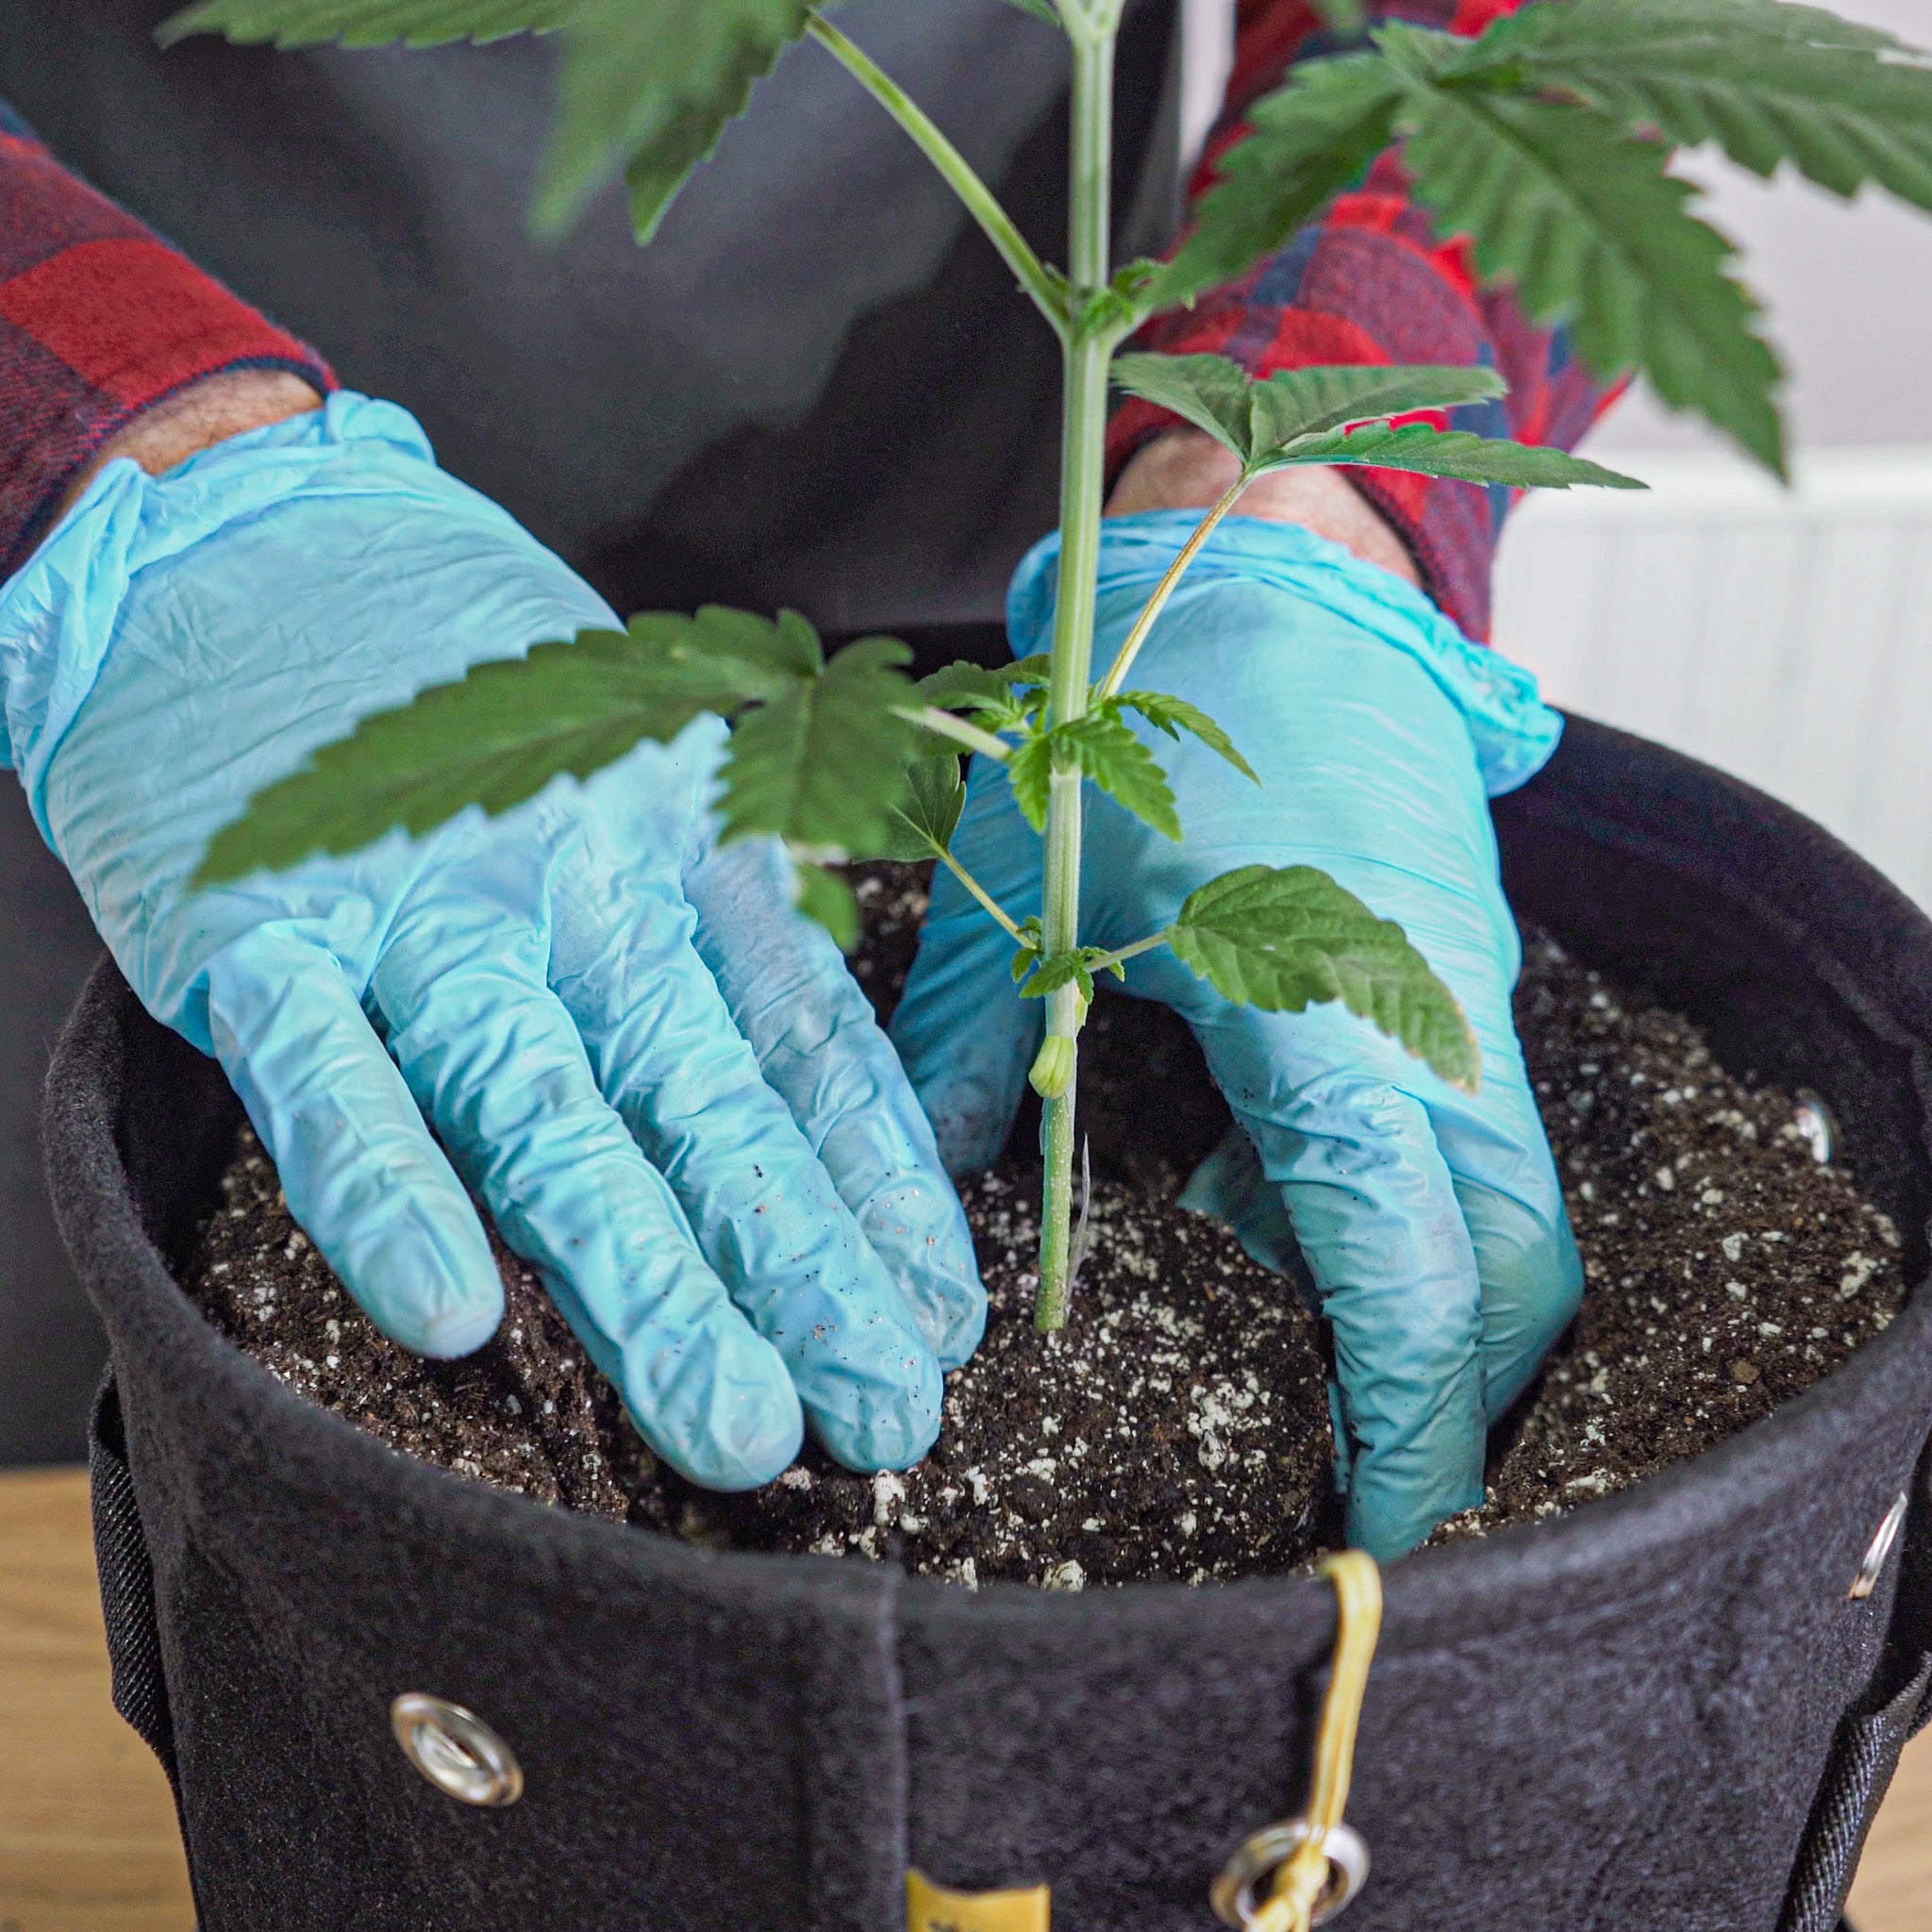 Image of a person wearing blue gloves and a plaid shirt, planting a young cannabis plant in a black BudPots fabric container. The person's hands are gently pressing the soil around the base of the plant to secure it, with a focus on the planting process. A yellow BudCups container is slightly visible in the background.